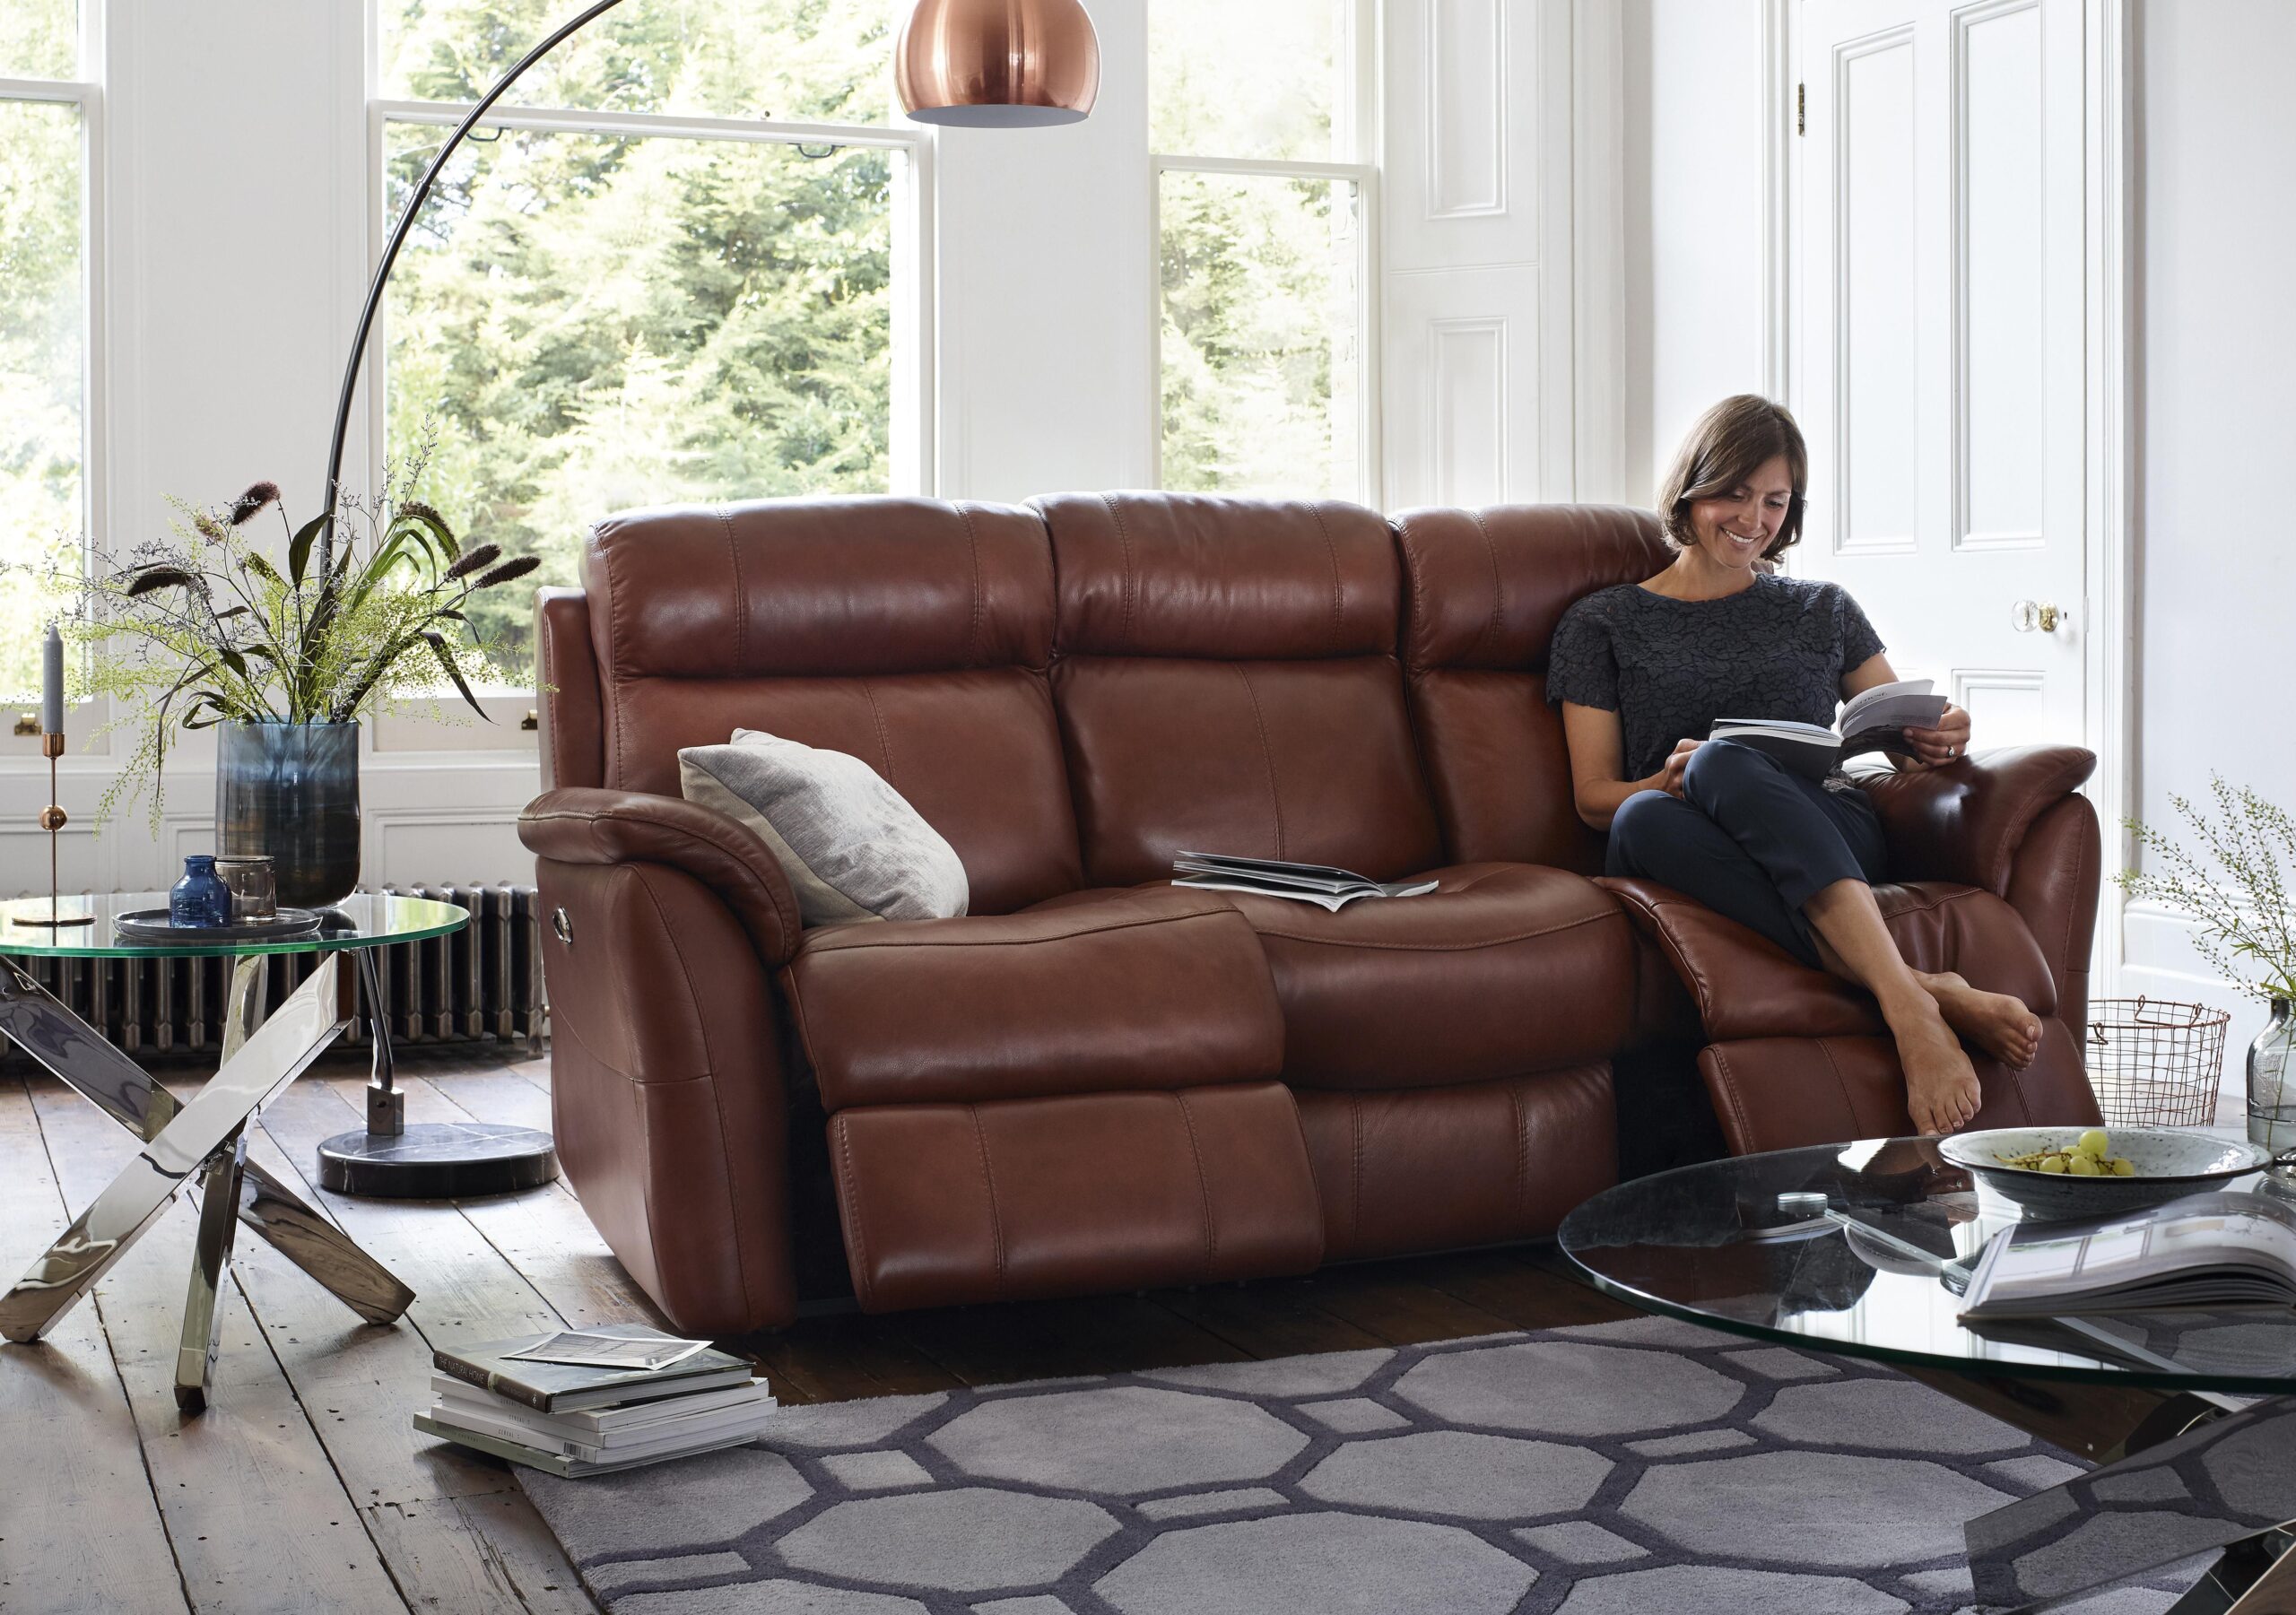 Power Recliners Leather You’ll Enjoy